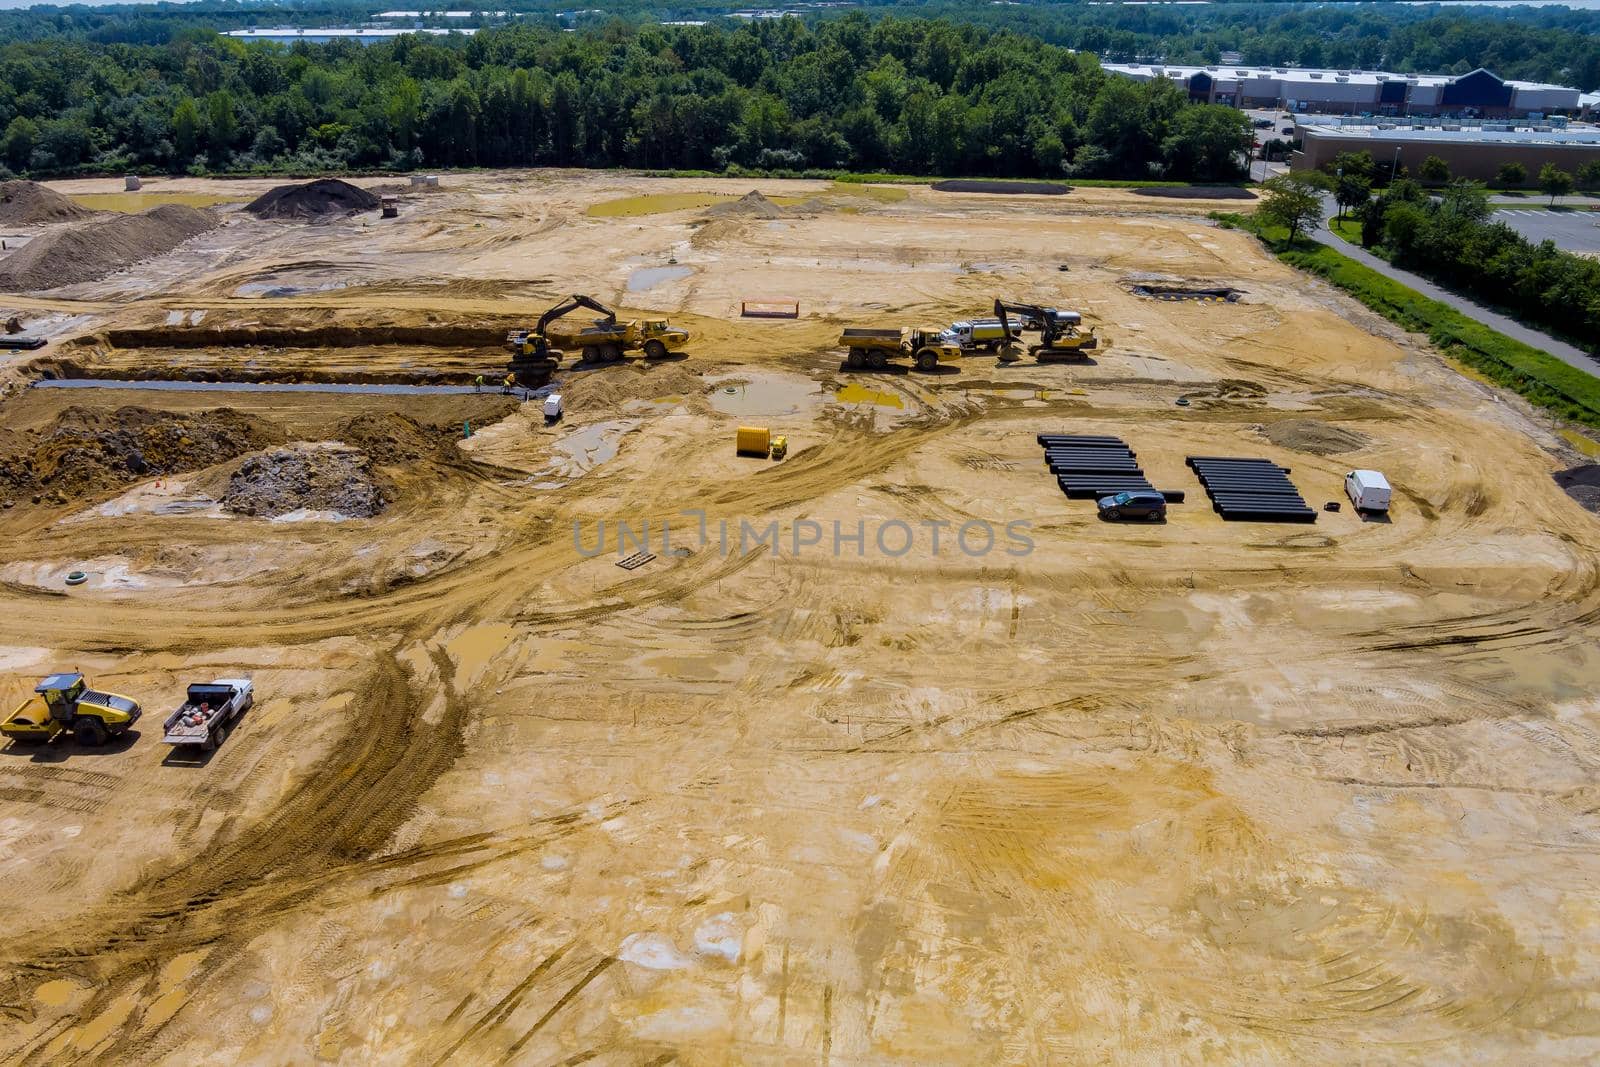 View of a large construction site where earthmoving equipment the ground to laying underground lay pipes residential buildings.